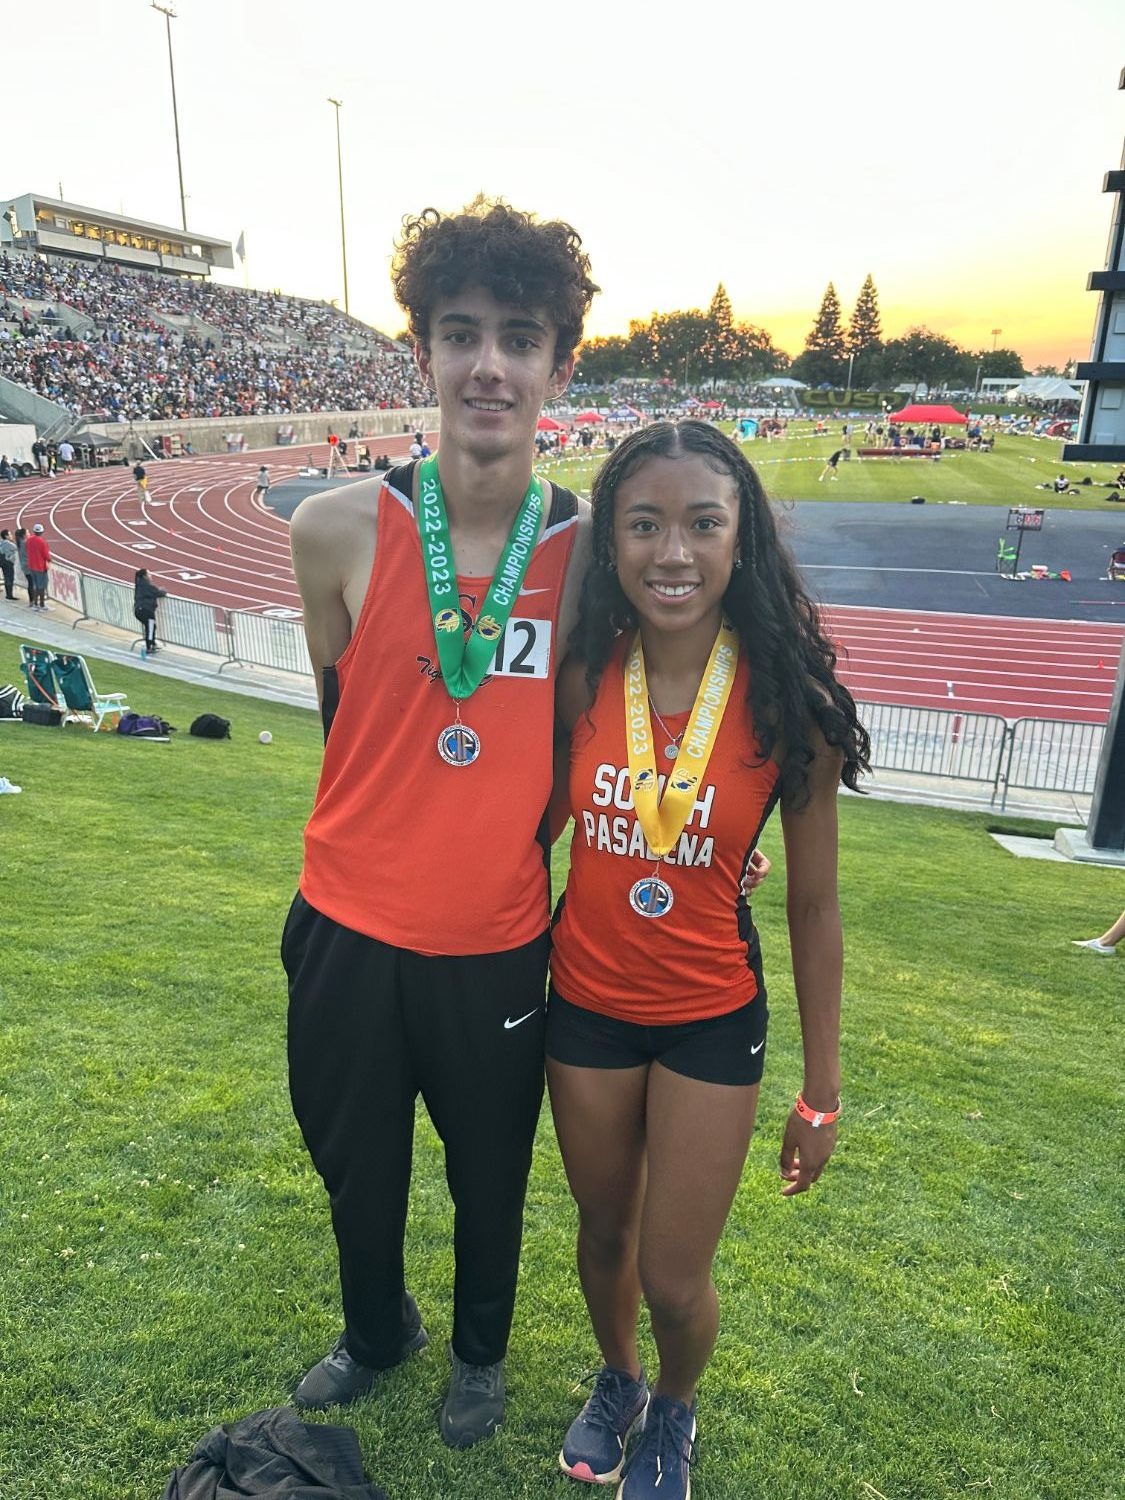 PHOTO: Mike Parkinson | The South Pasadenan | SPHS Track and Field athletes Mia Holden and Keeran Murray after receiving their medals at the CIF State Championship 2023.